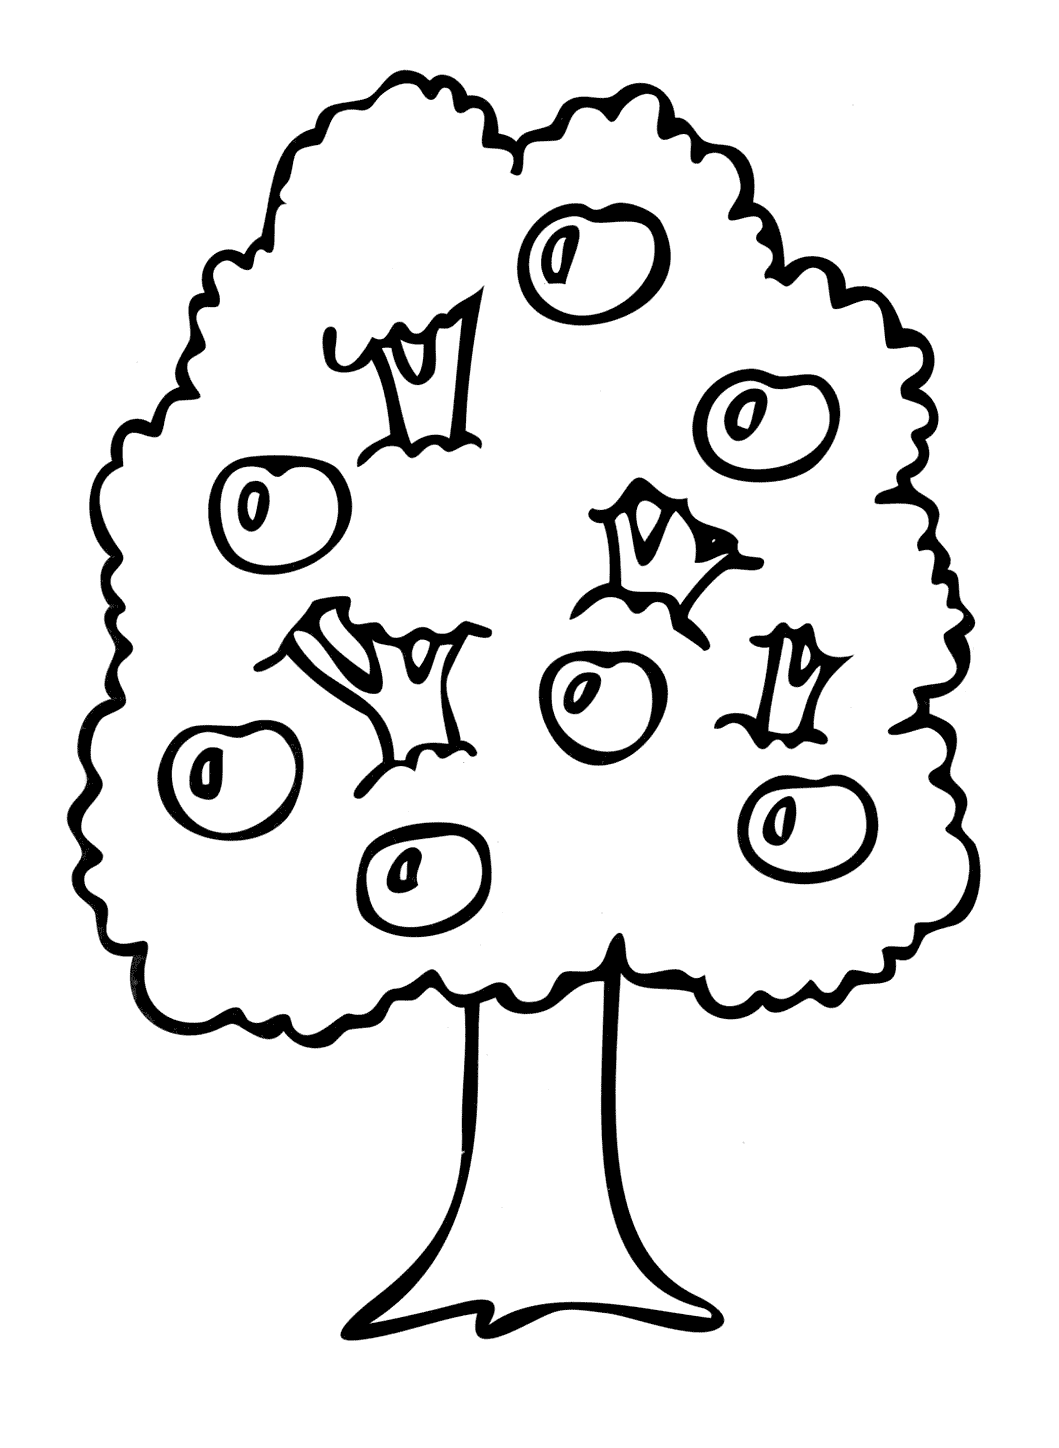 Download Coloring page - Apple tree